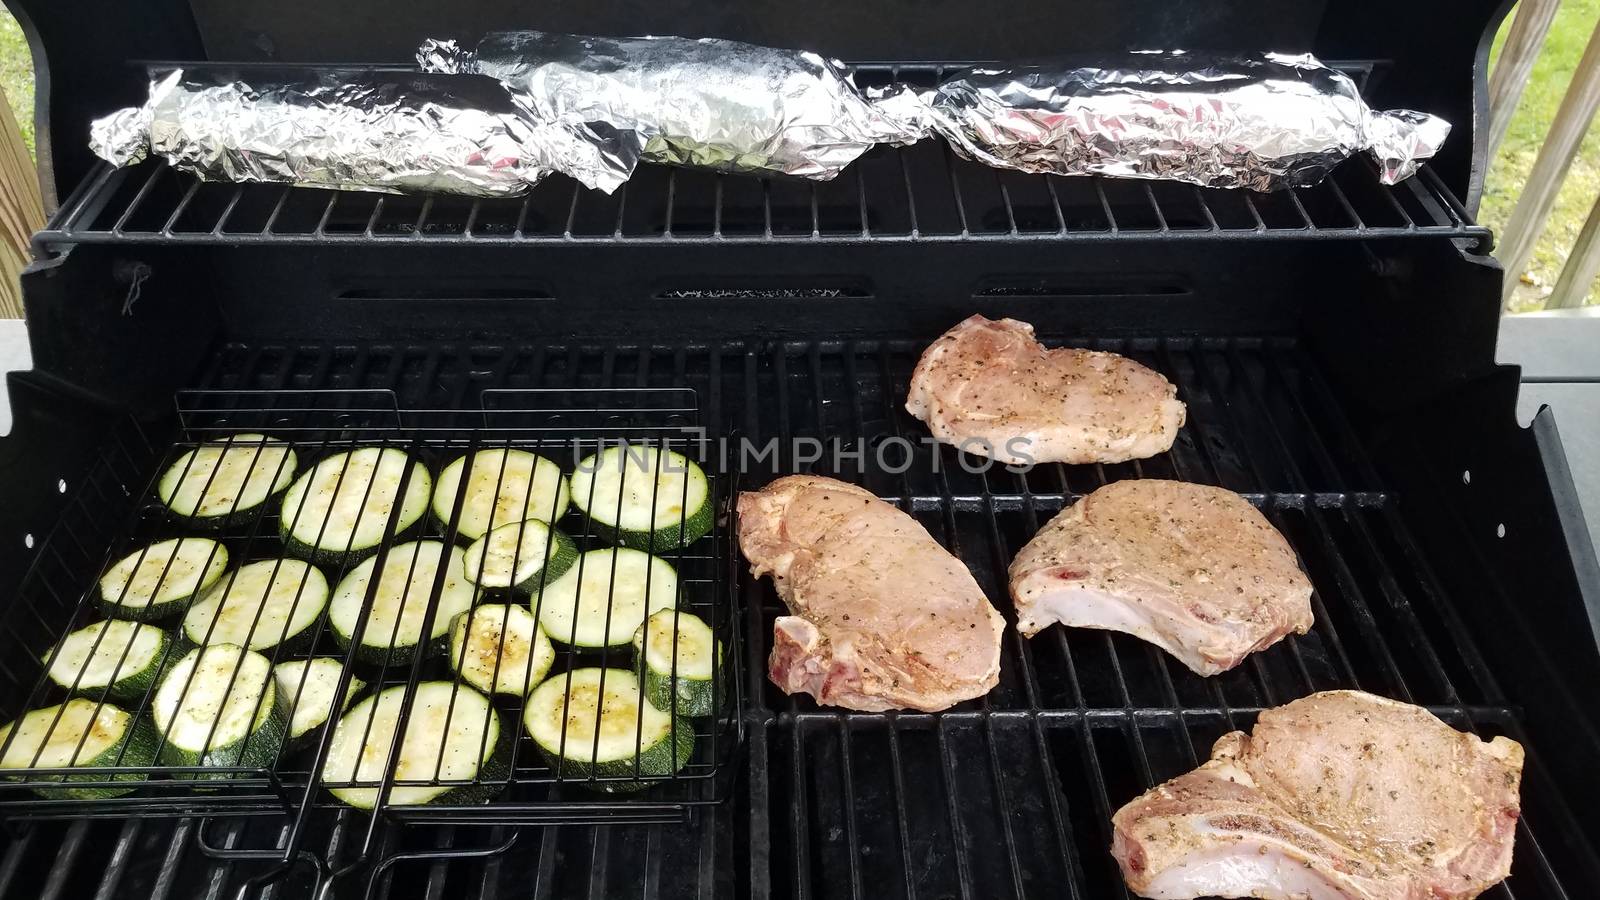 zucchini and pork chops on barbecue grill with corn by stockphotofan1